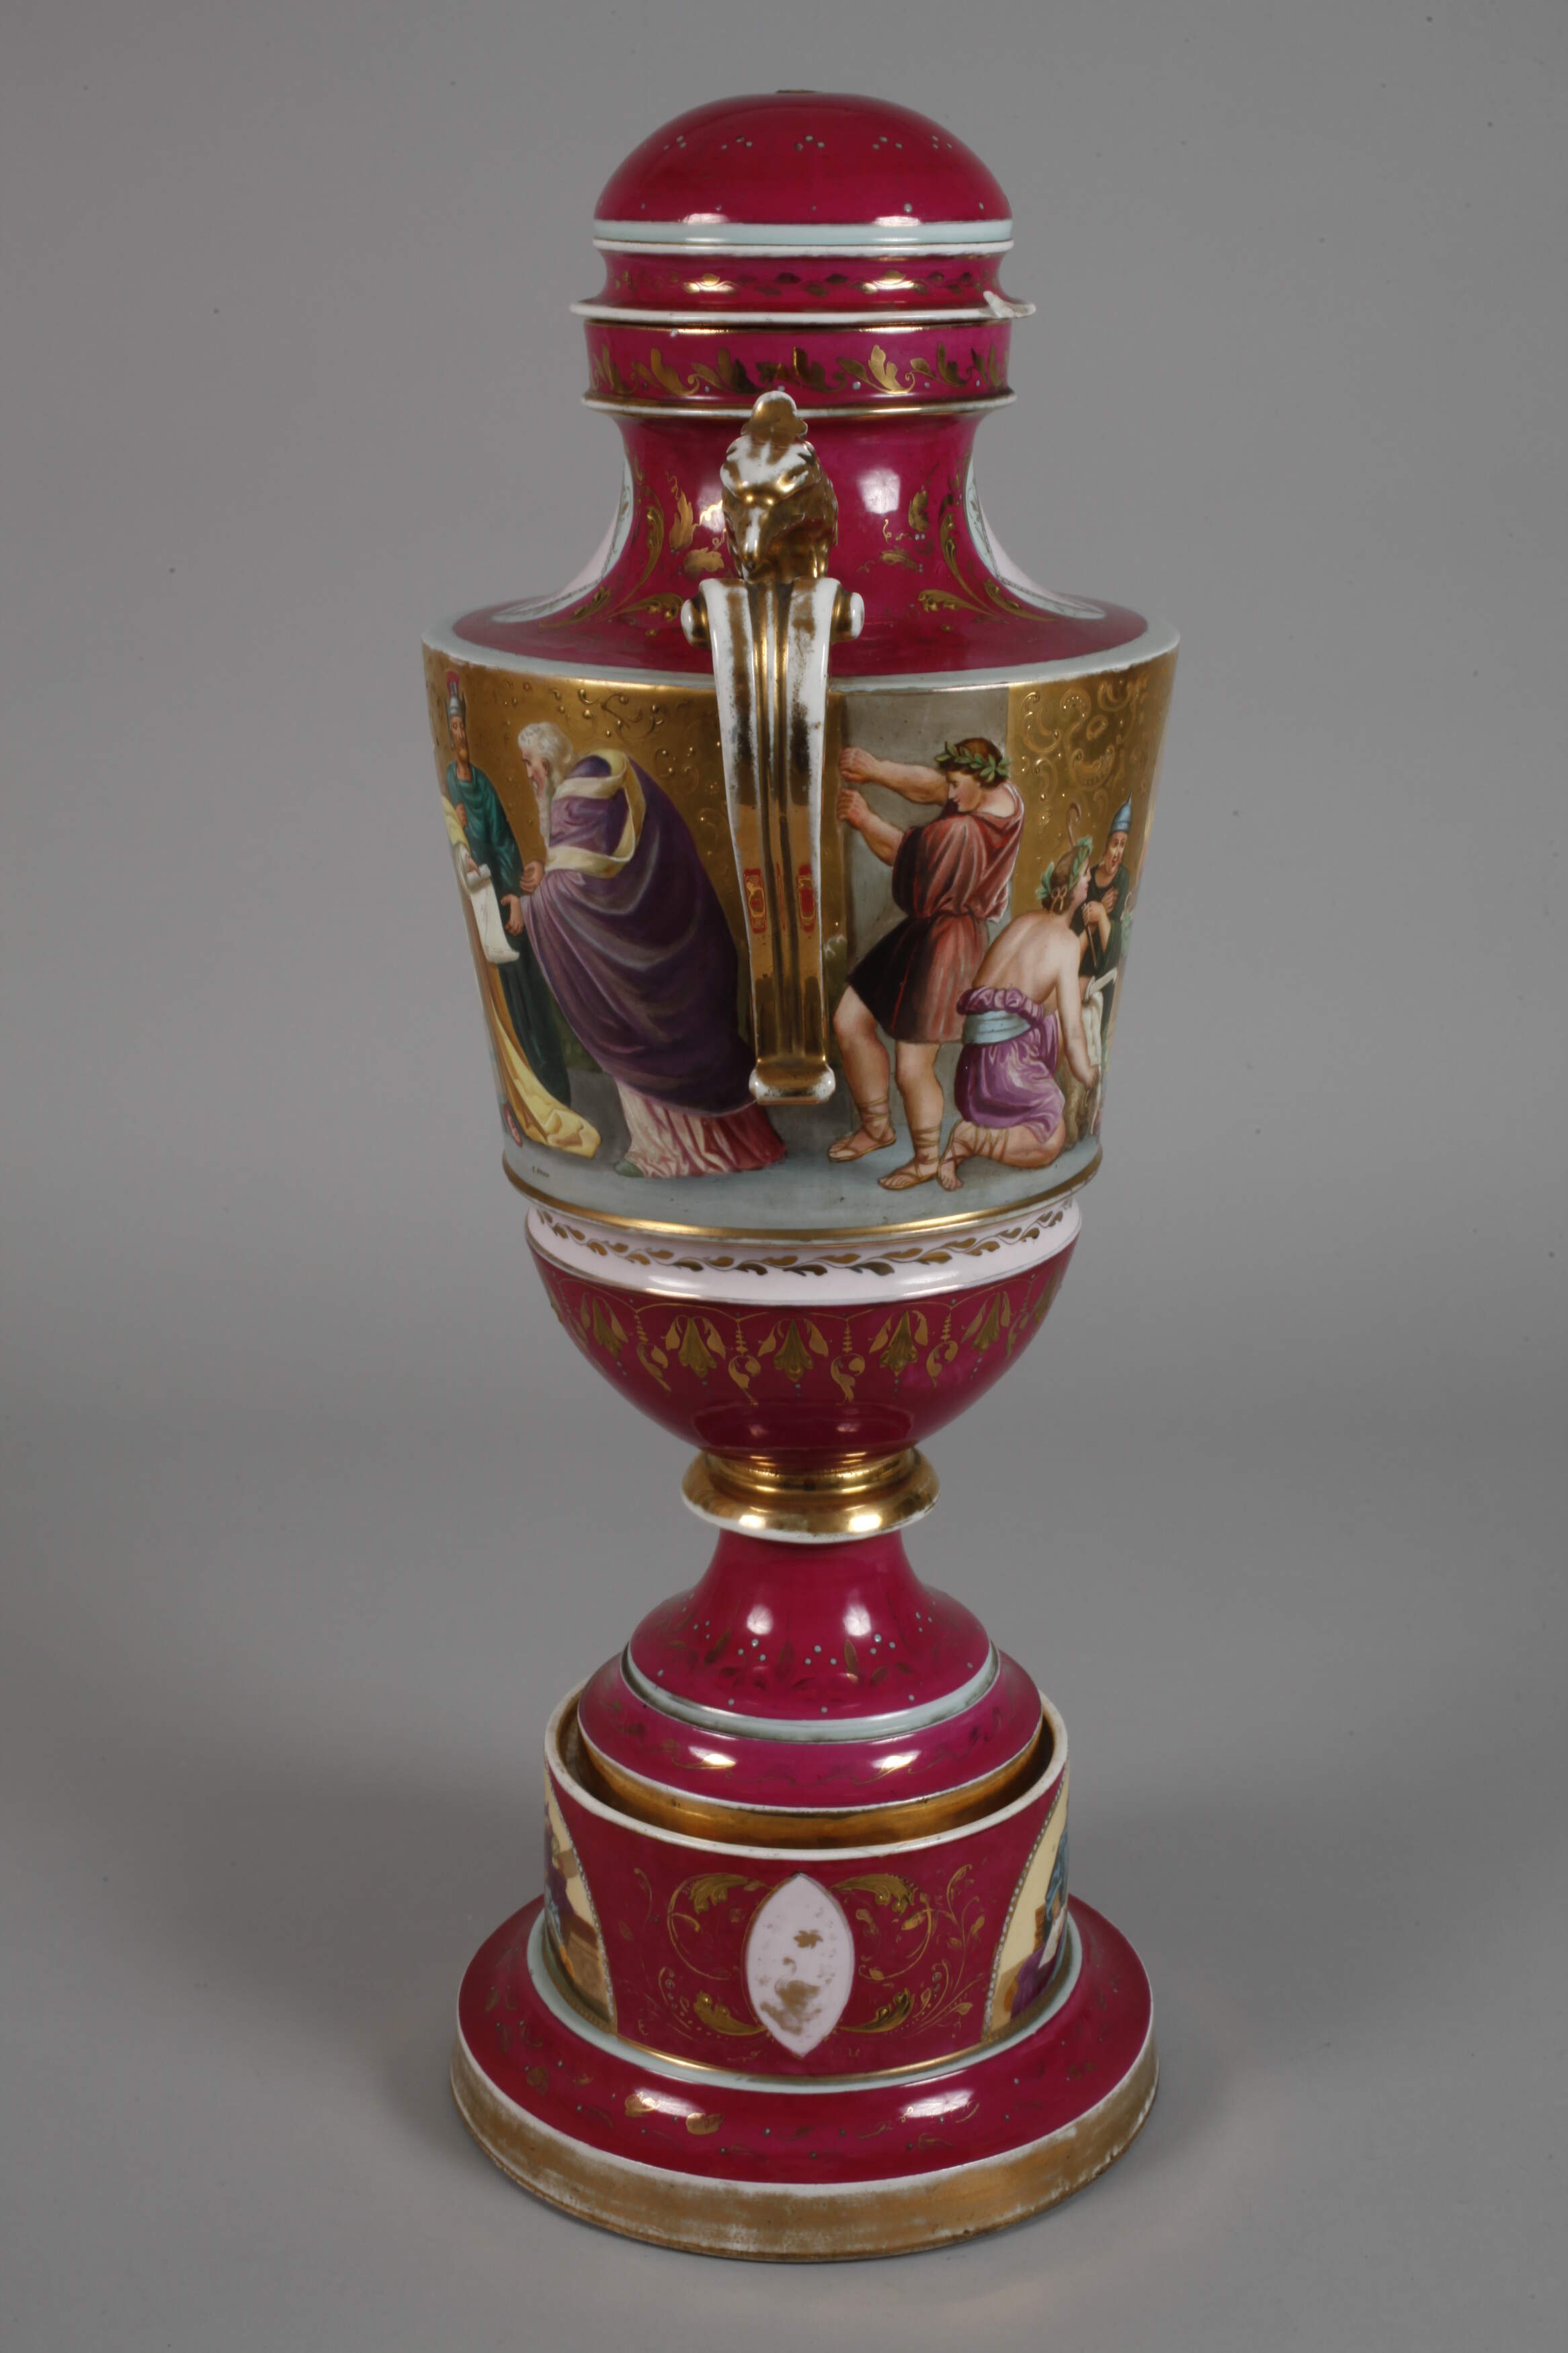 Bohemian ceremonial vase with pedestal in the old Viennese style - Image 3 of 9